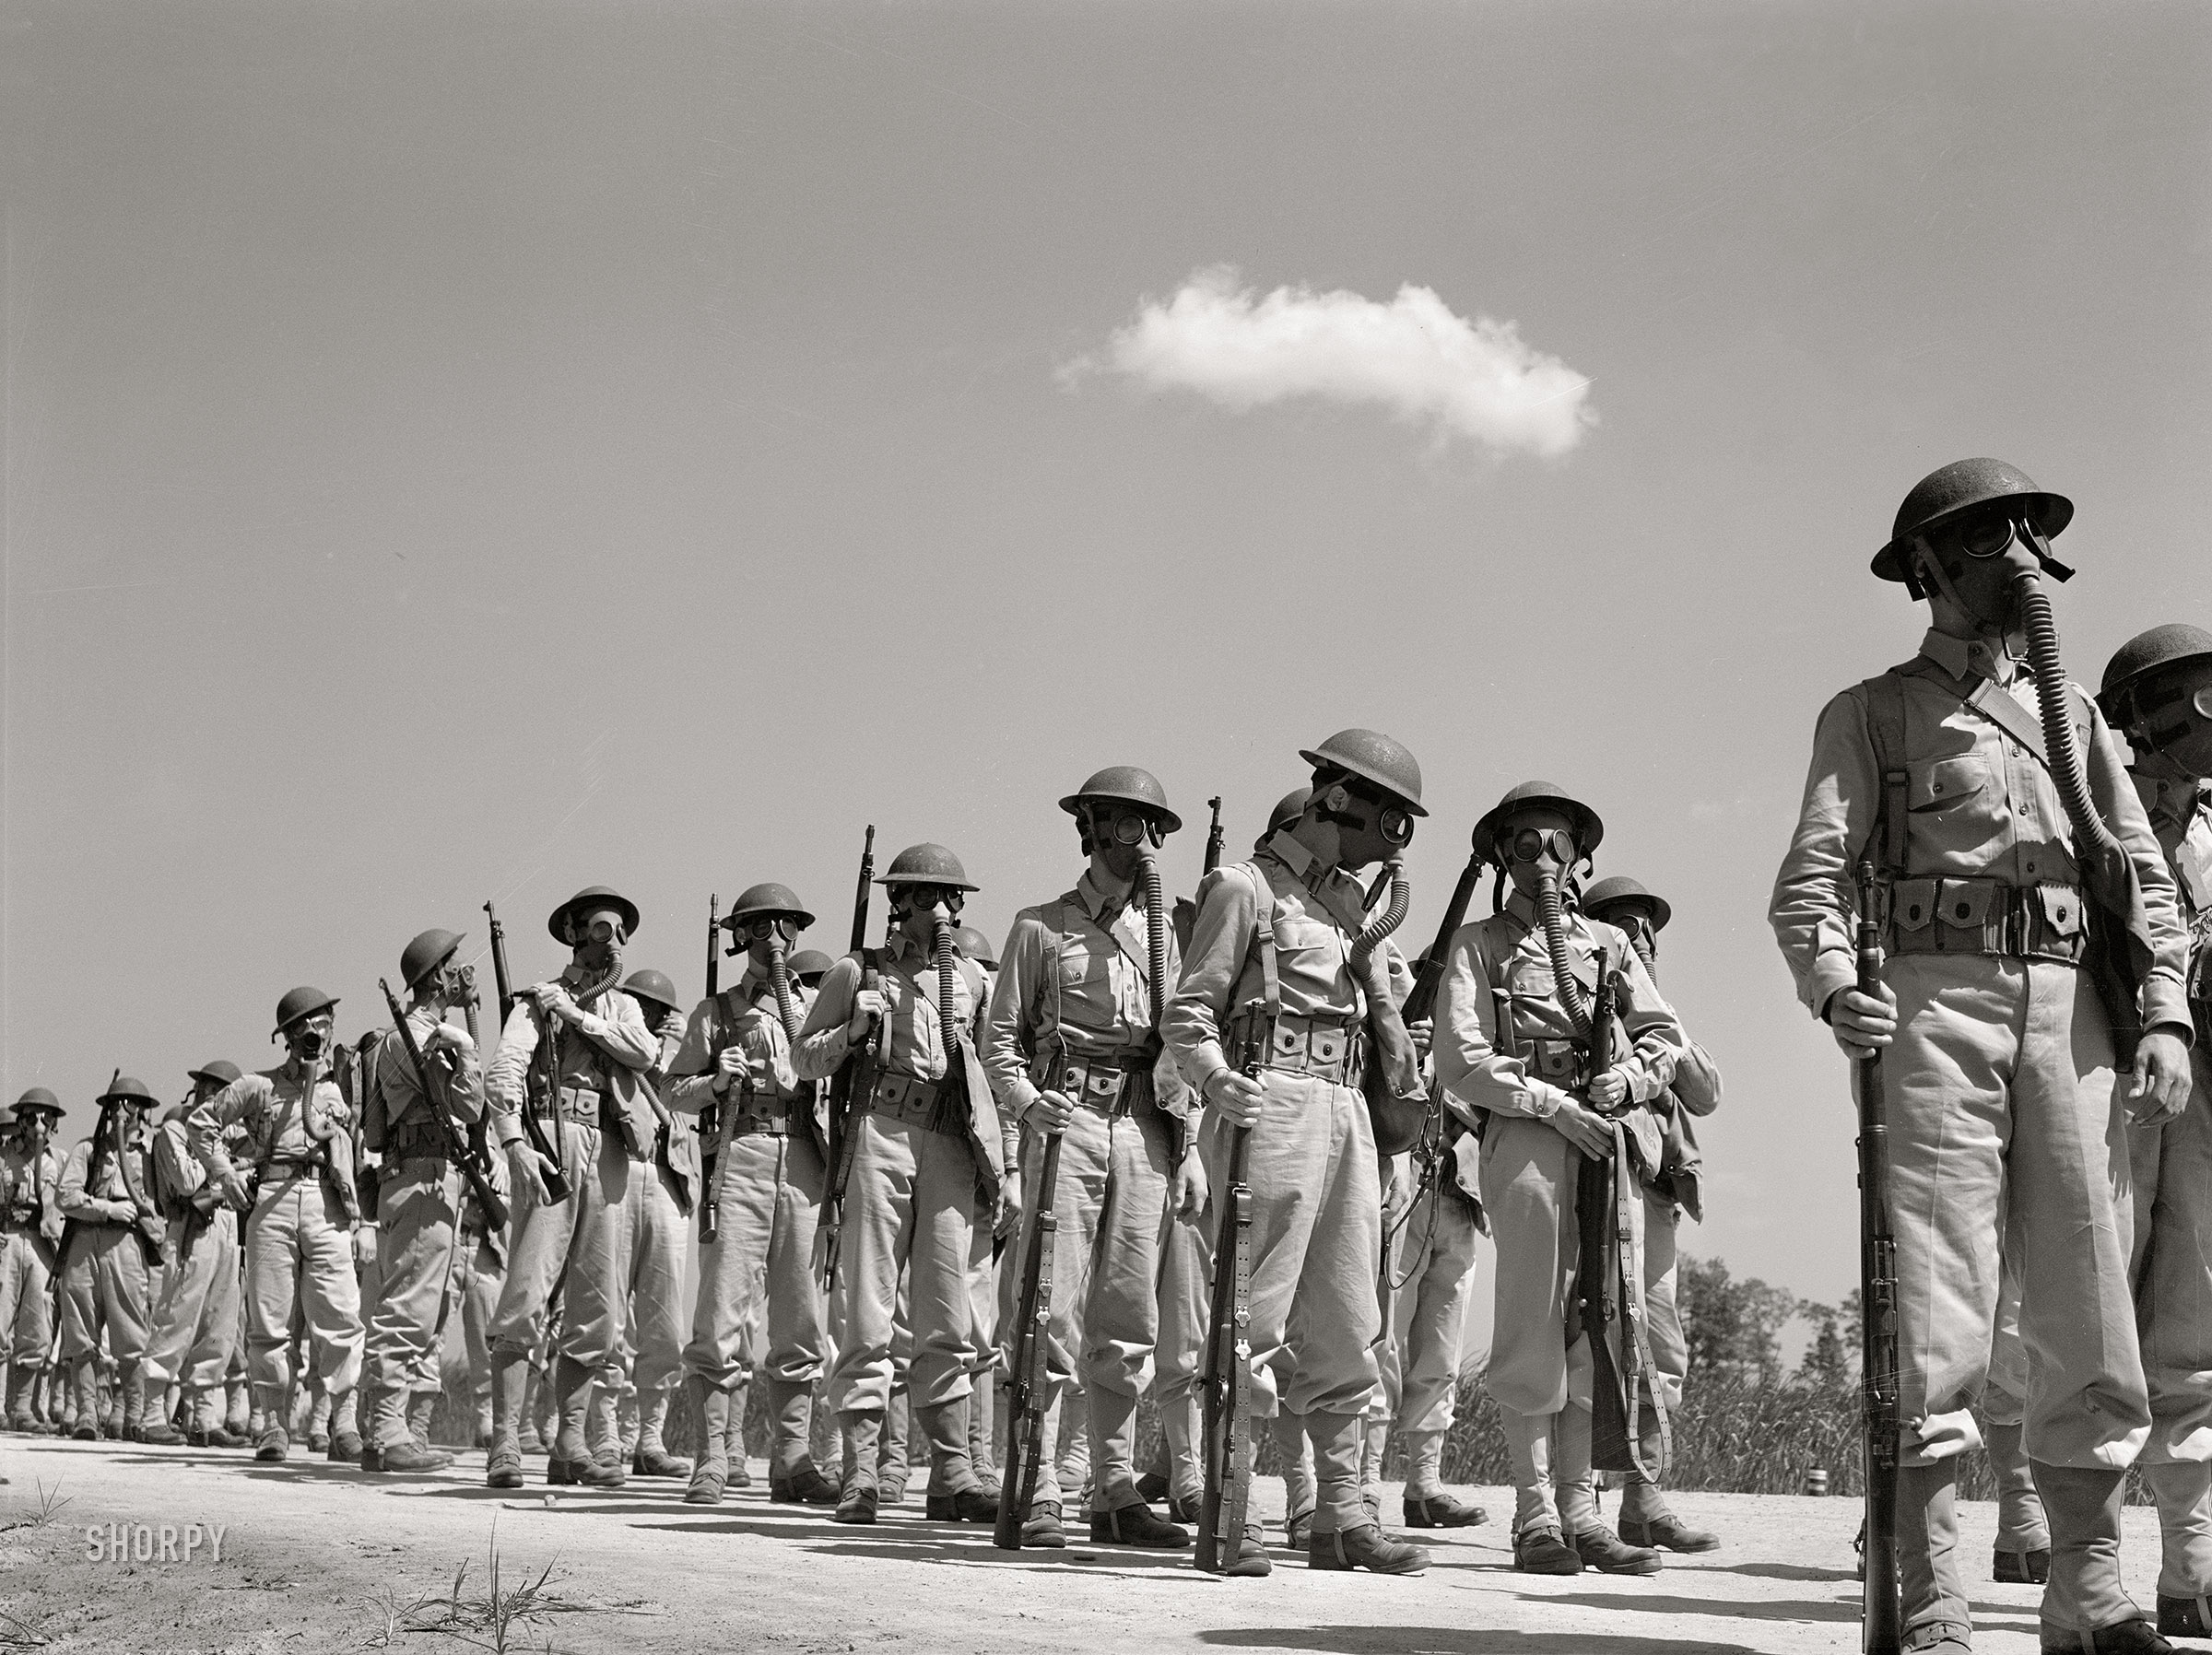 June 1942. "Edgewood Arsenal, Maryland. Gas demonstration. Soldiers wearing gas masks after having been sprayed with gas from a plane." Photo by Jack Delano for the Office of War Information. View full size.